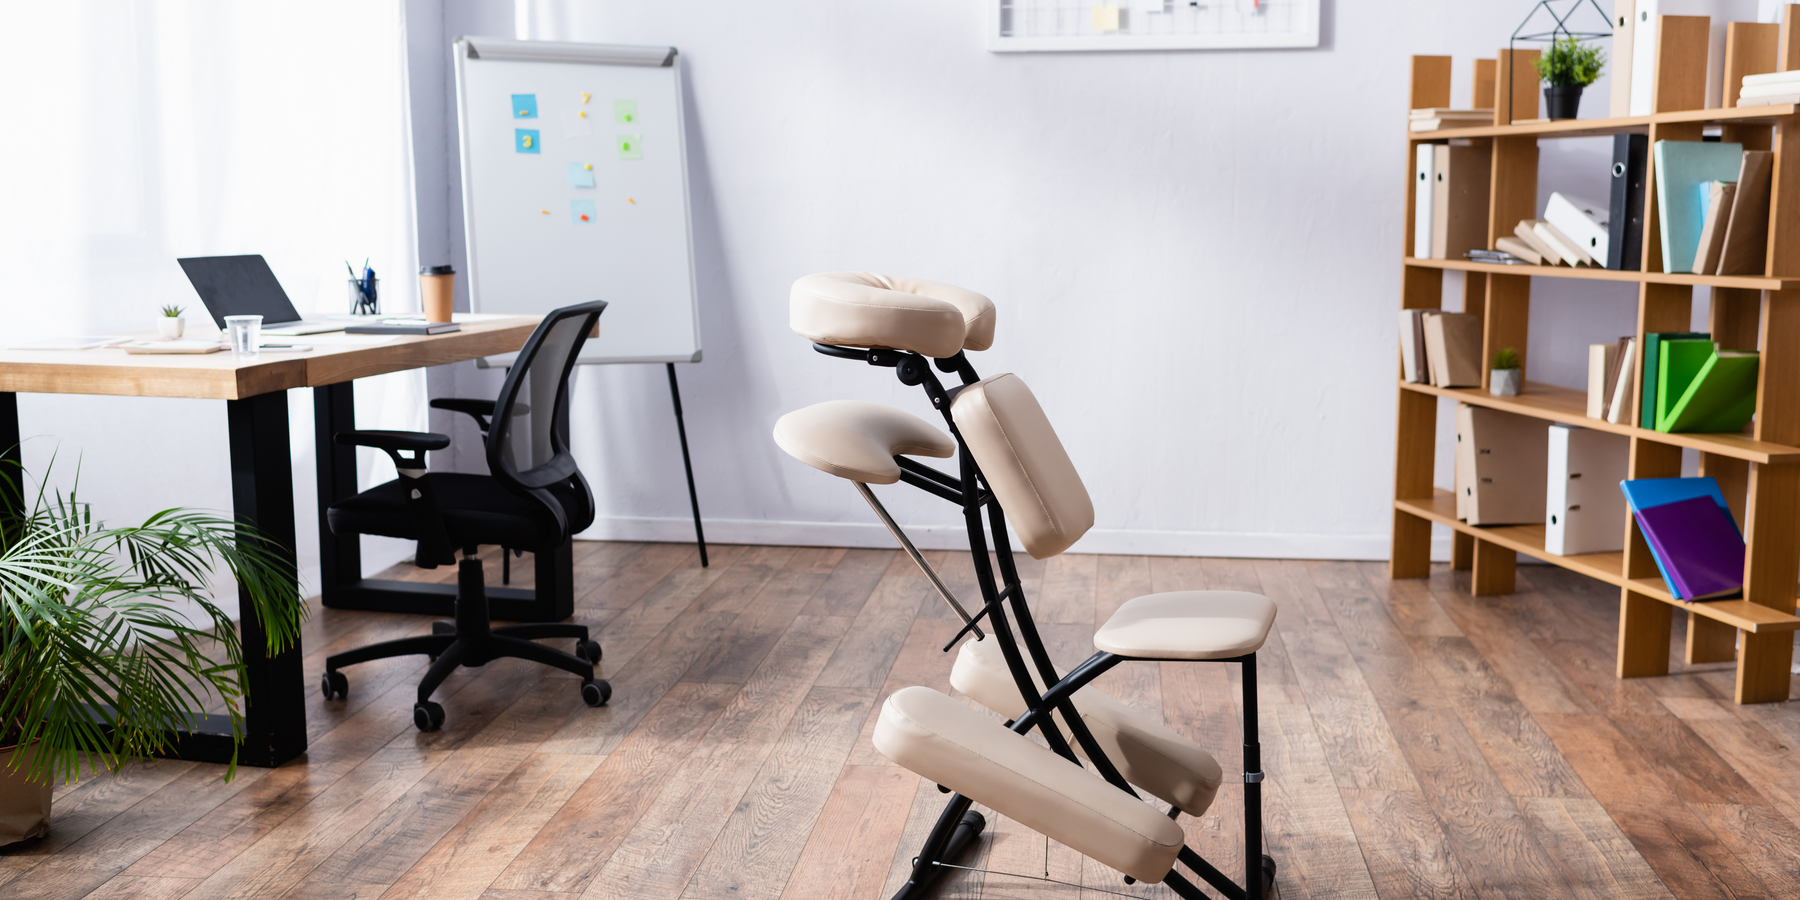 How To Adjust Massage Table Height: Learn The Basics!